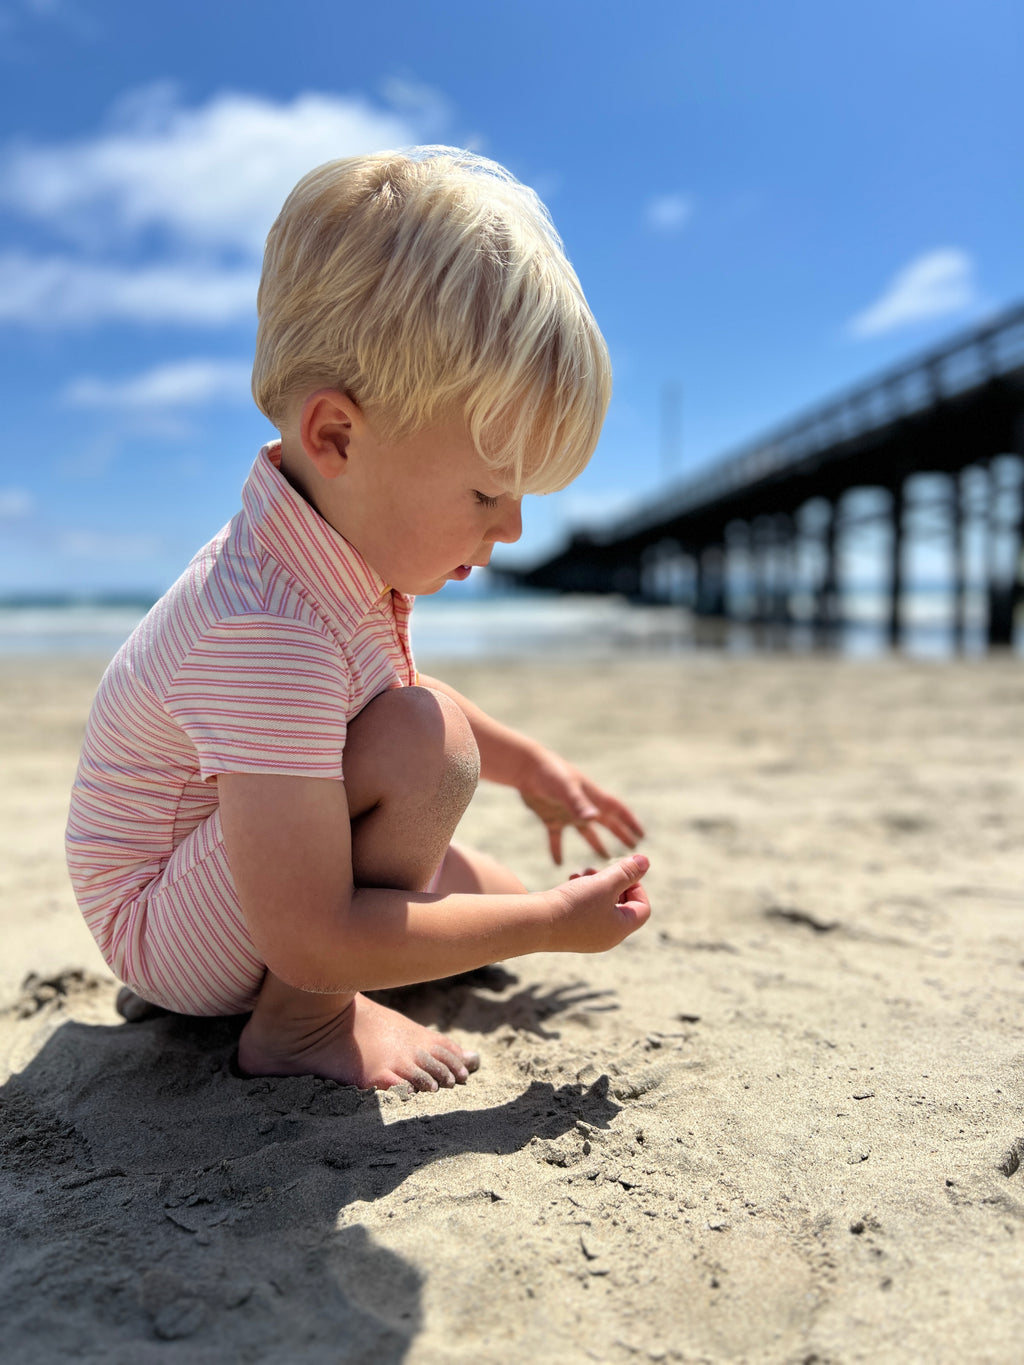 Small blonde hair boy wearing our cream/orange stripe pique polo romper playing with the sand at the beach in summer.